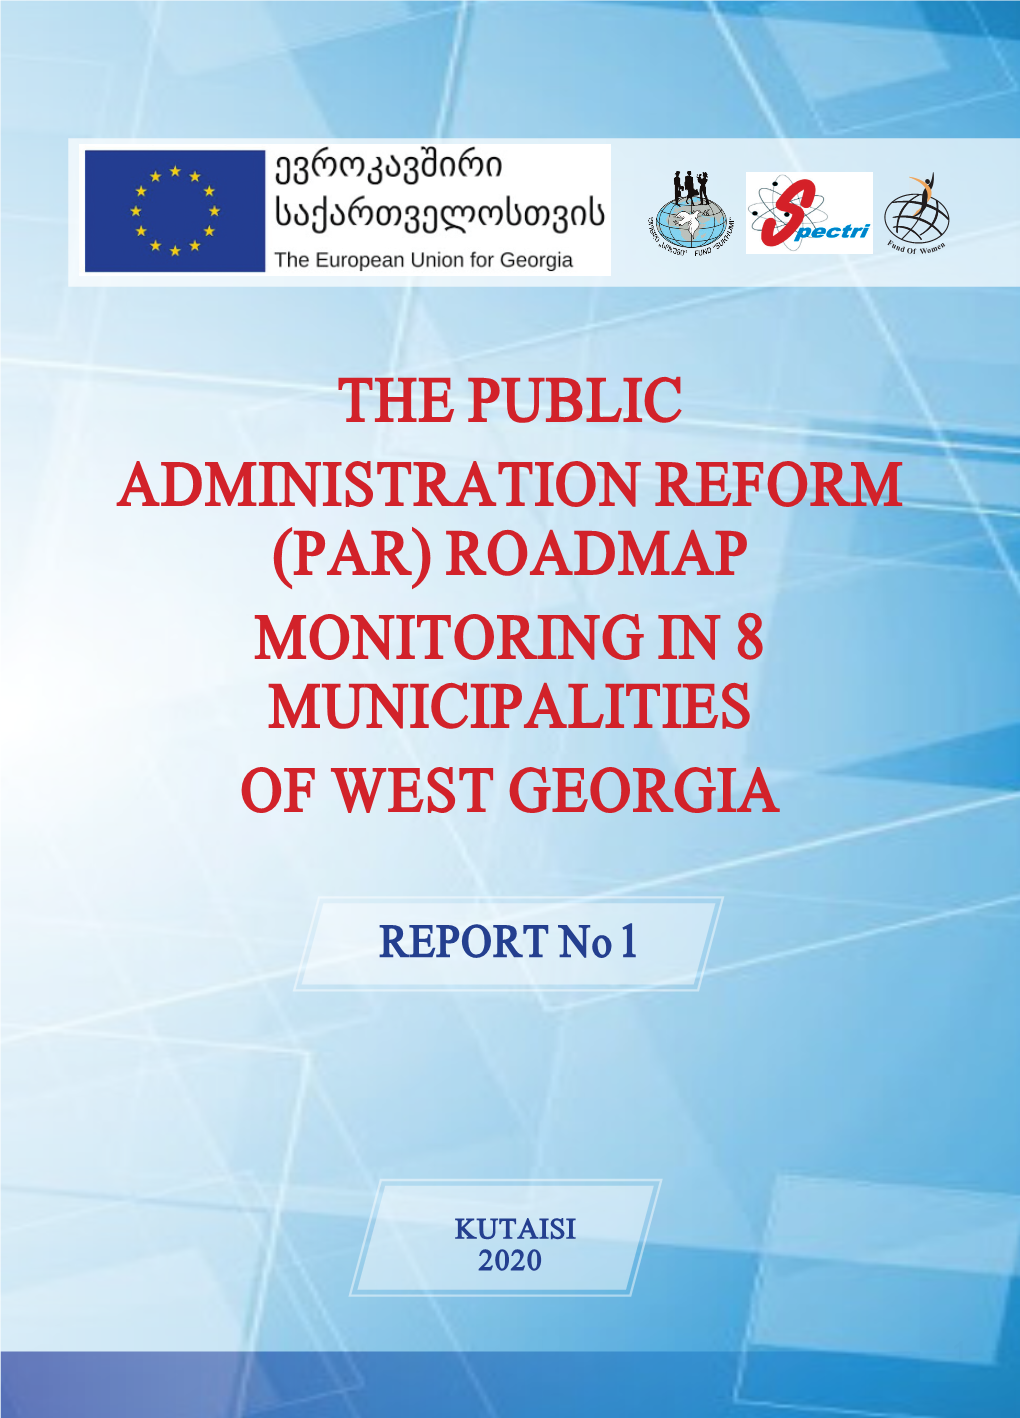 The Public Administration Reform (Par) Roadmap Monitoring in 8 Municipalities of West Georgia